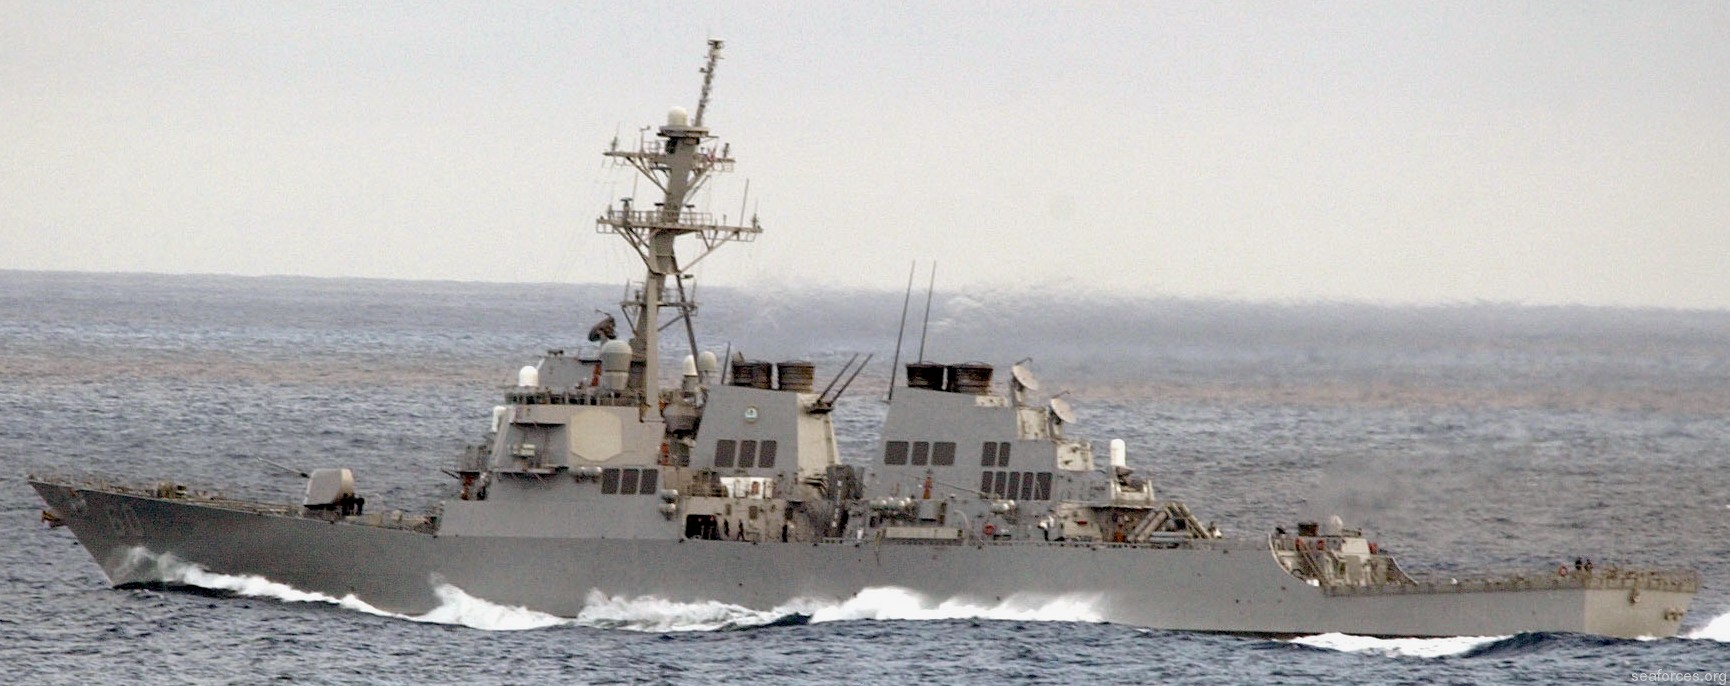 ddg-60 uss paul hamilton guided missile destroyer us navy 42